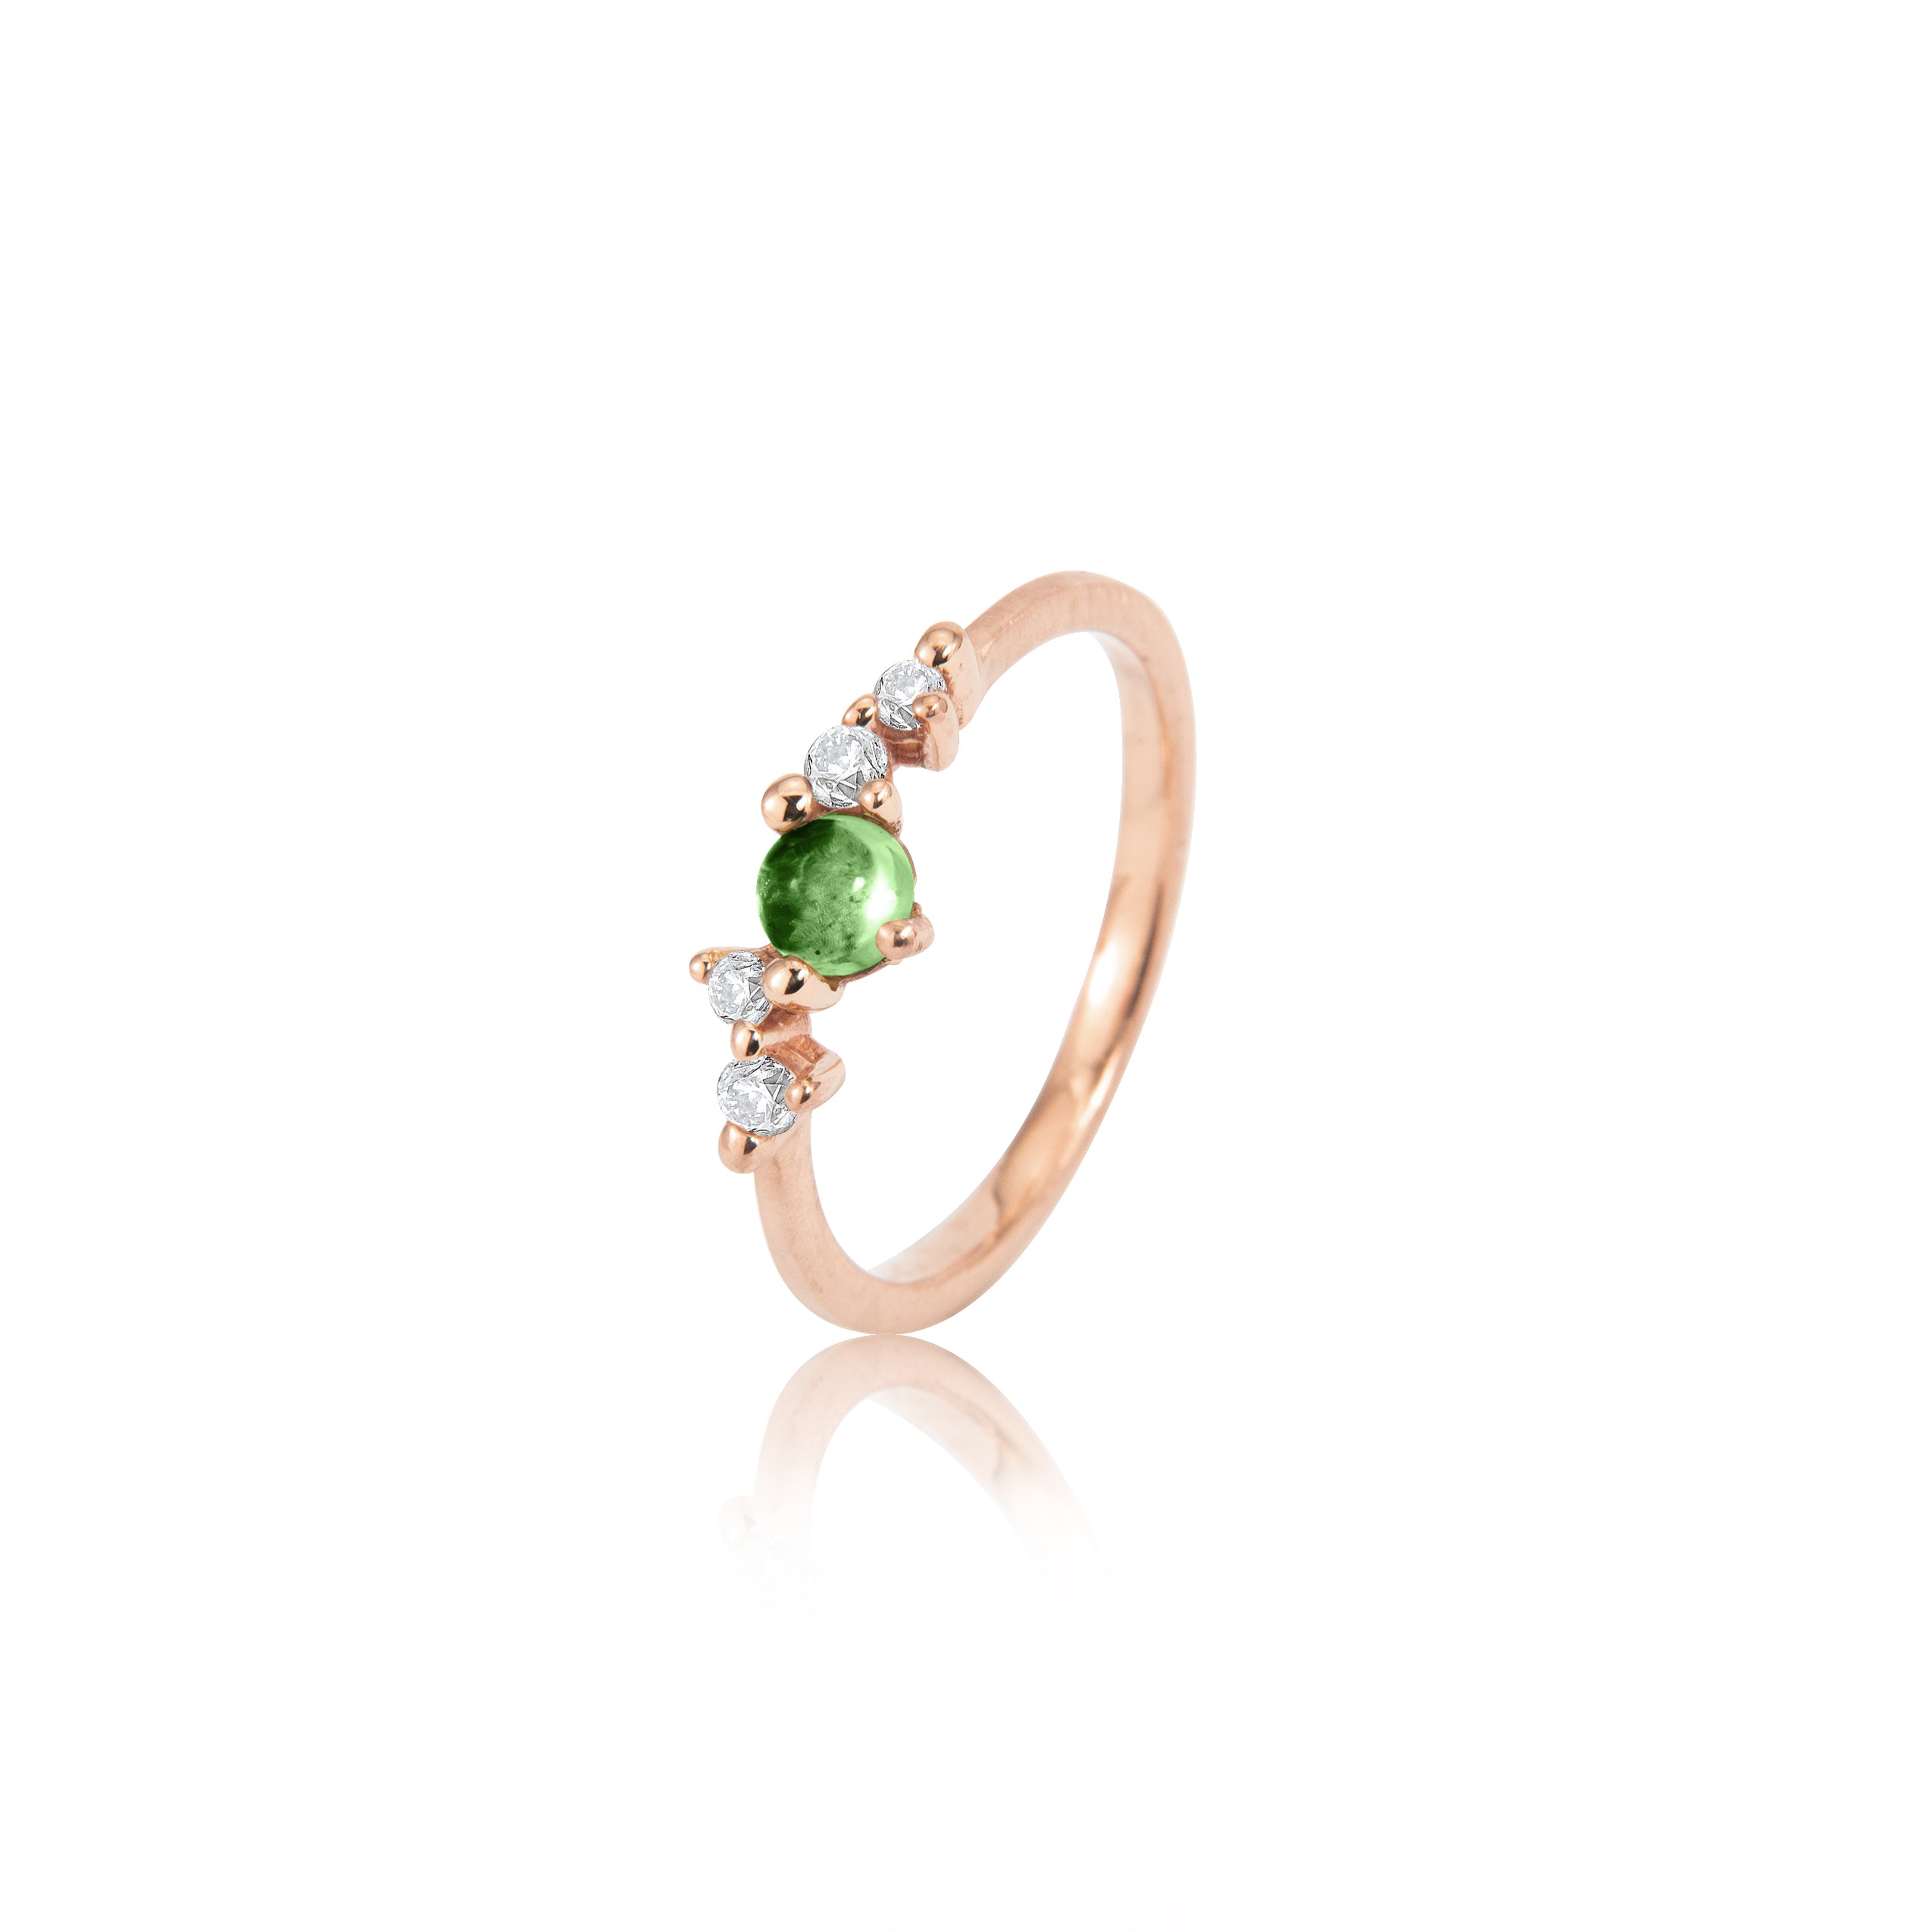 Stellini ring "smal" in 585/- gold with green tourmaline